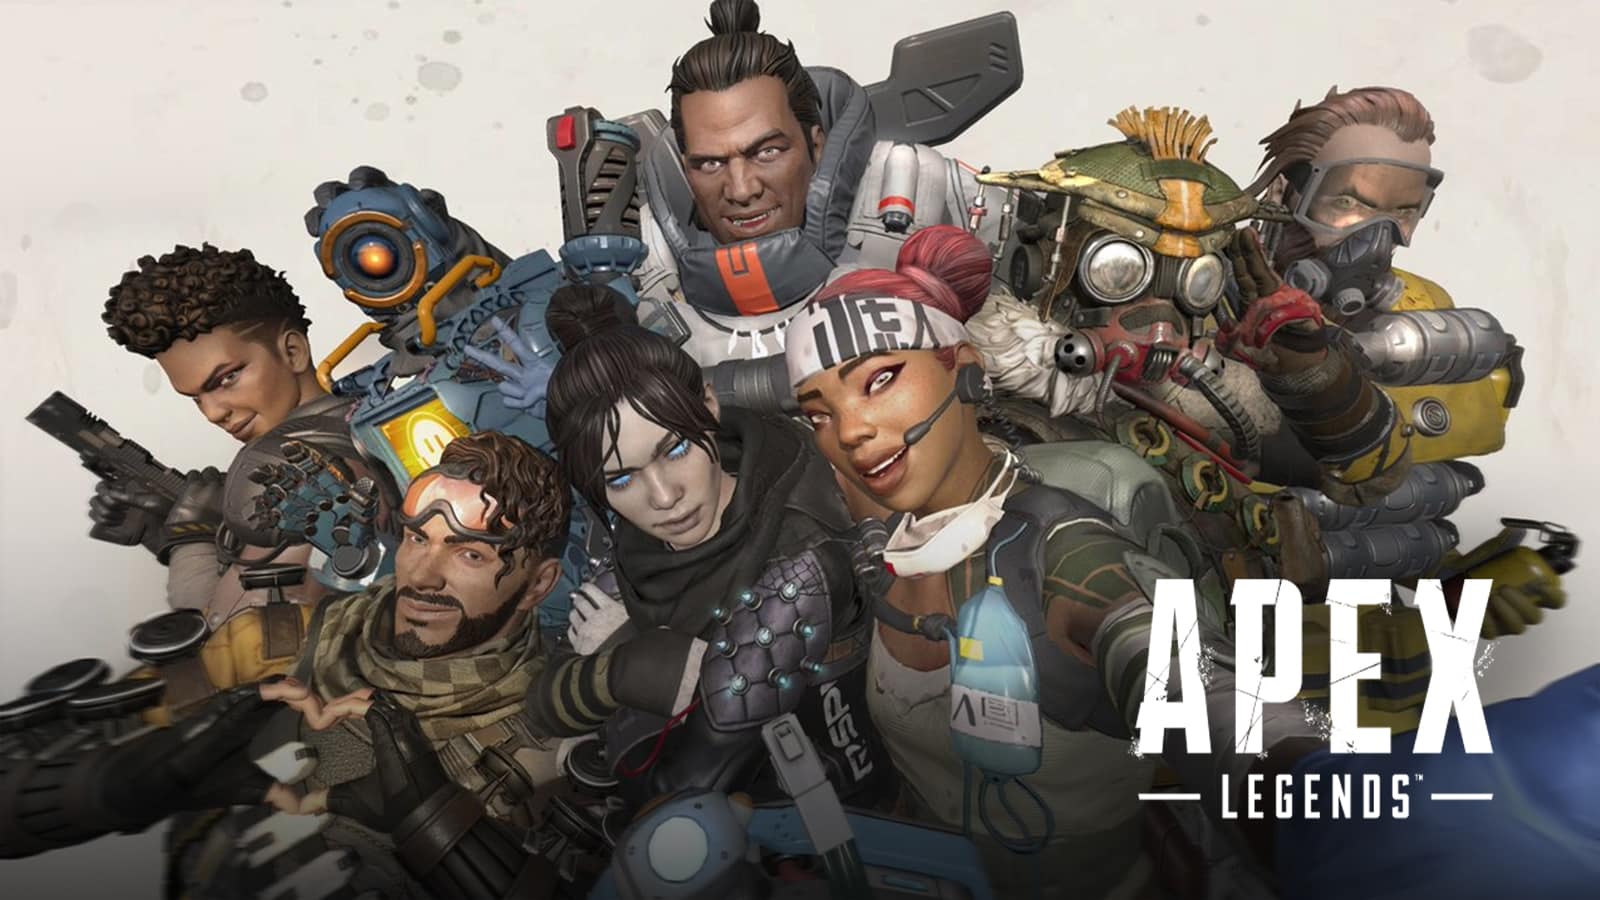 Abilities for a steam-themed Apex Legends character have leaked